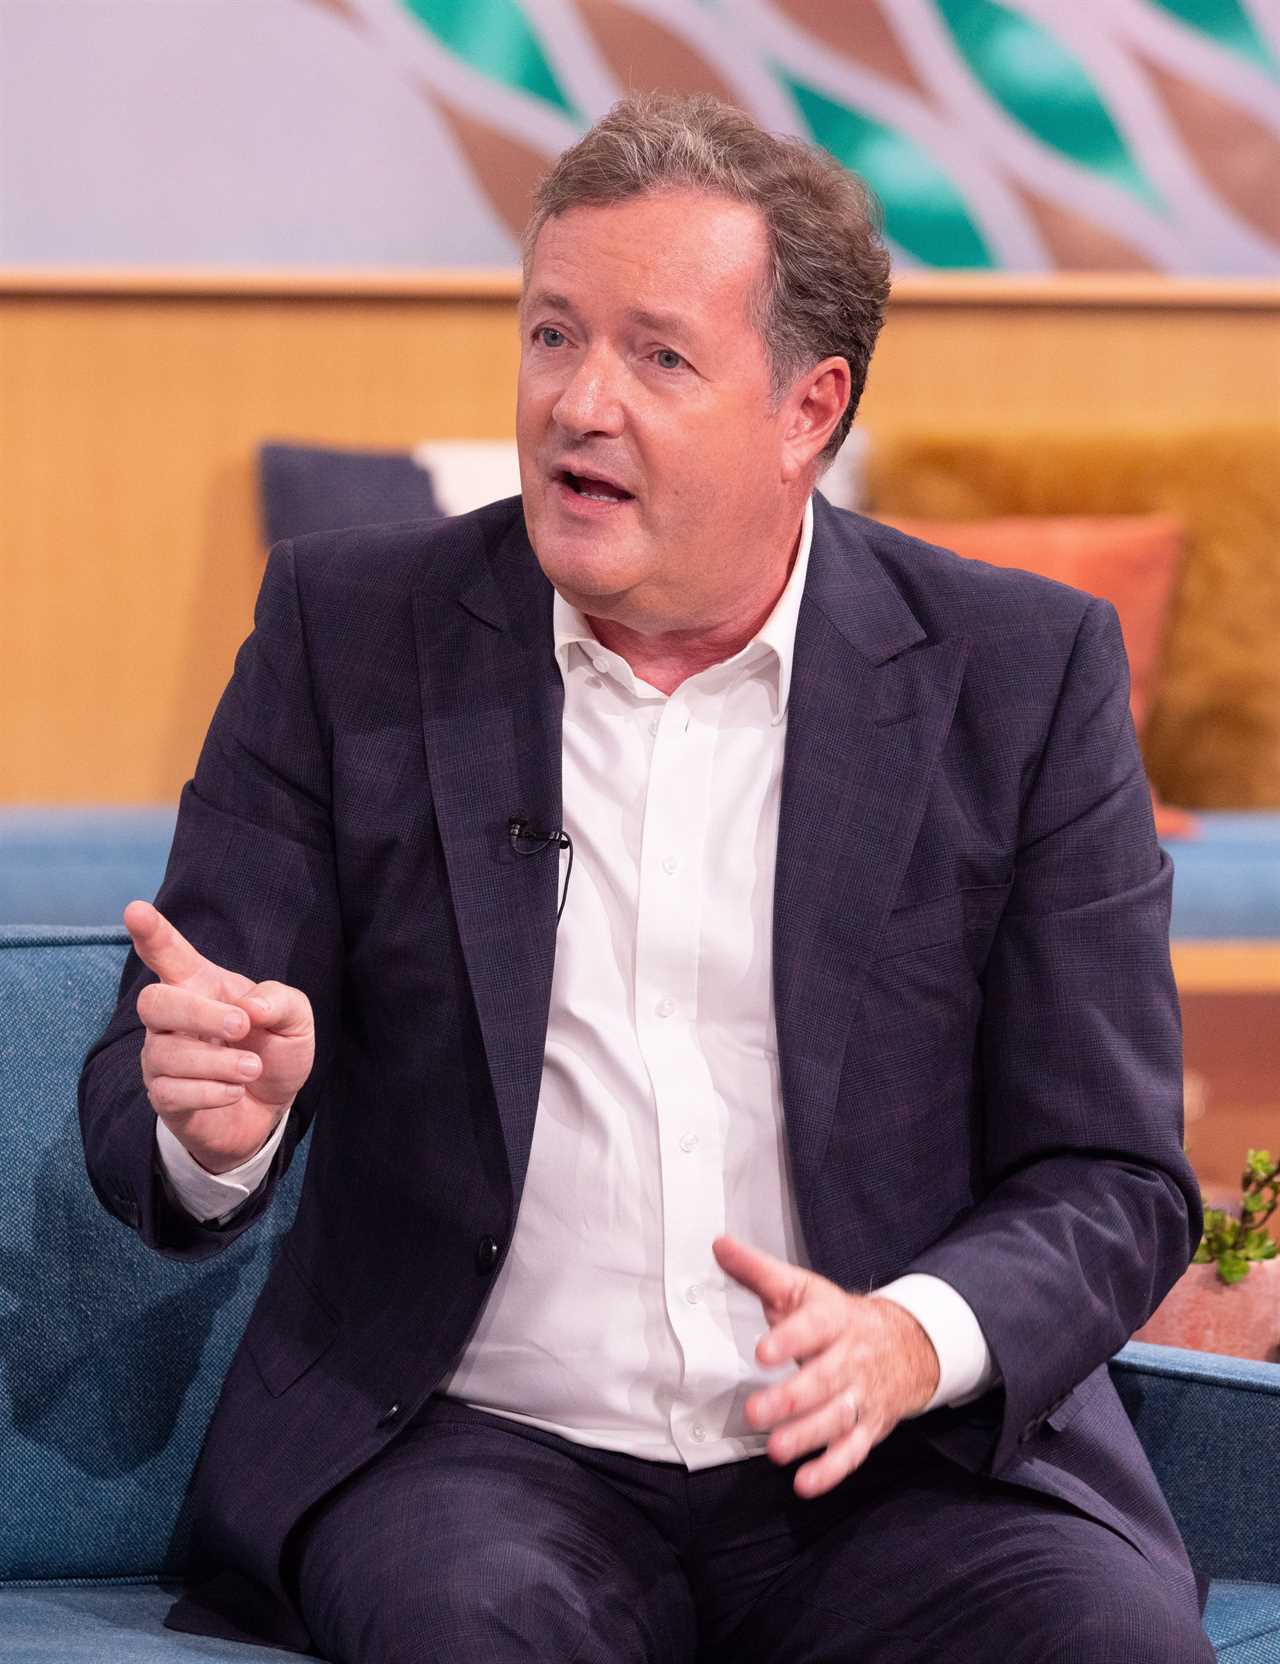 Piers Morgan slams ‘despicable’ Anthea Turner after sharing ‘offensive’ pic of obese disabled person with Covid mask on